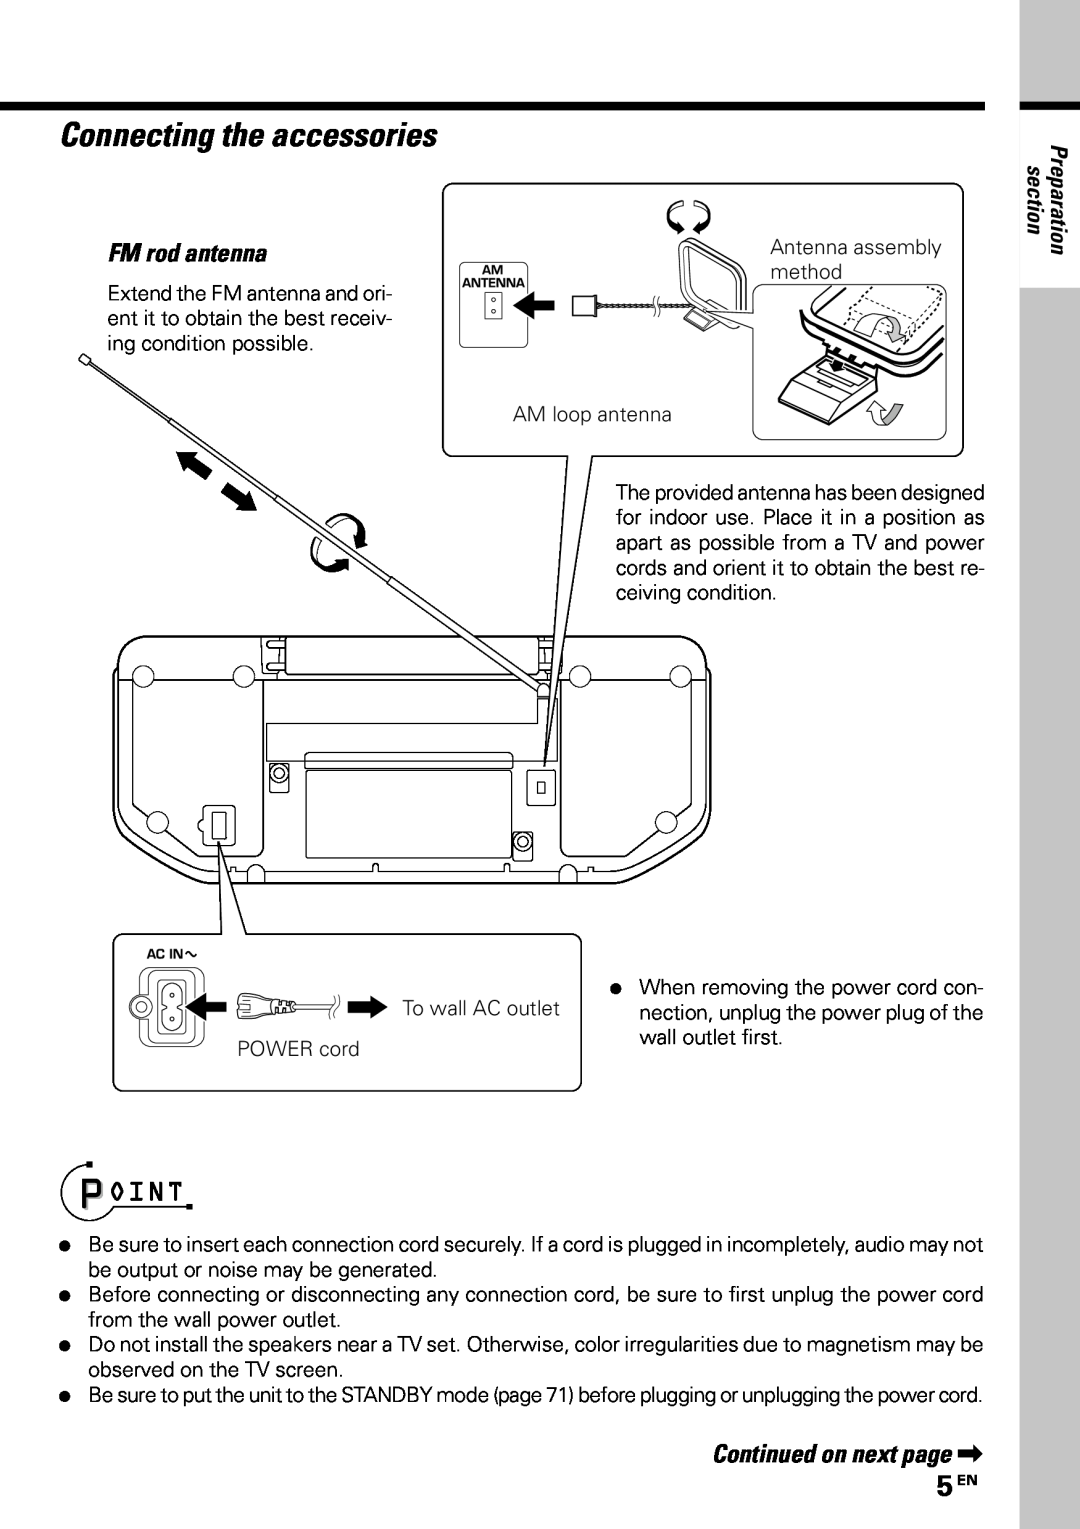 Kenwood MDX-G3 instruction manual Connecting the accessories, 5 EN, FM rod antenna, Continued on next page 